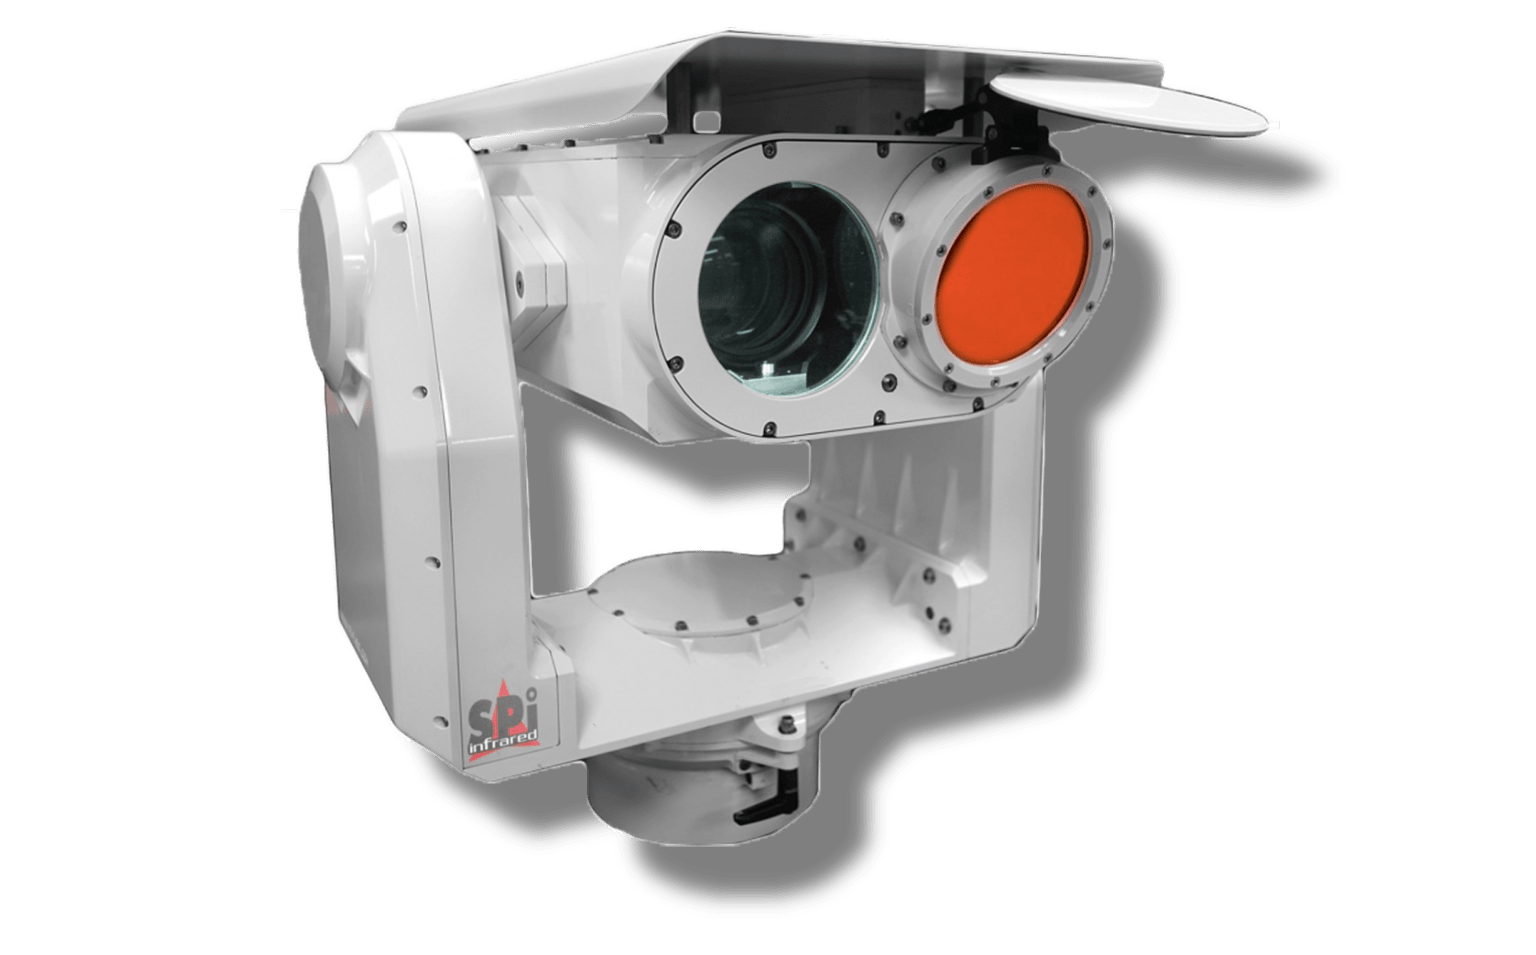 Long range flir camera system for ISR, security and surveillance applications